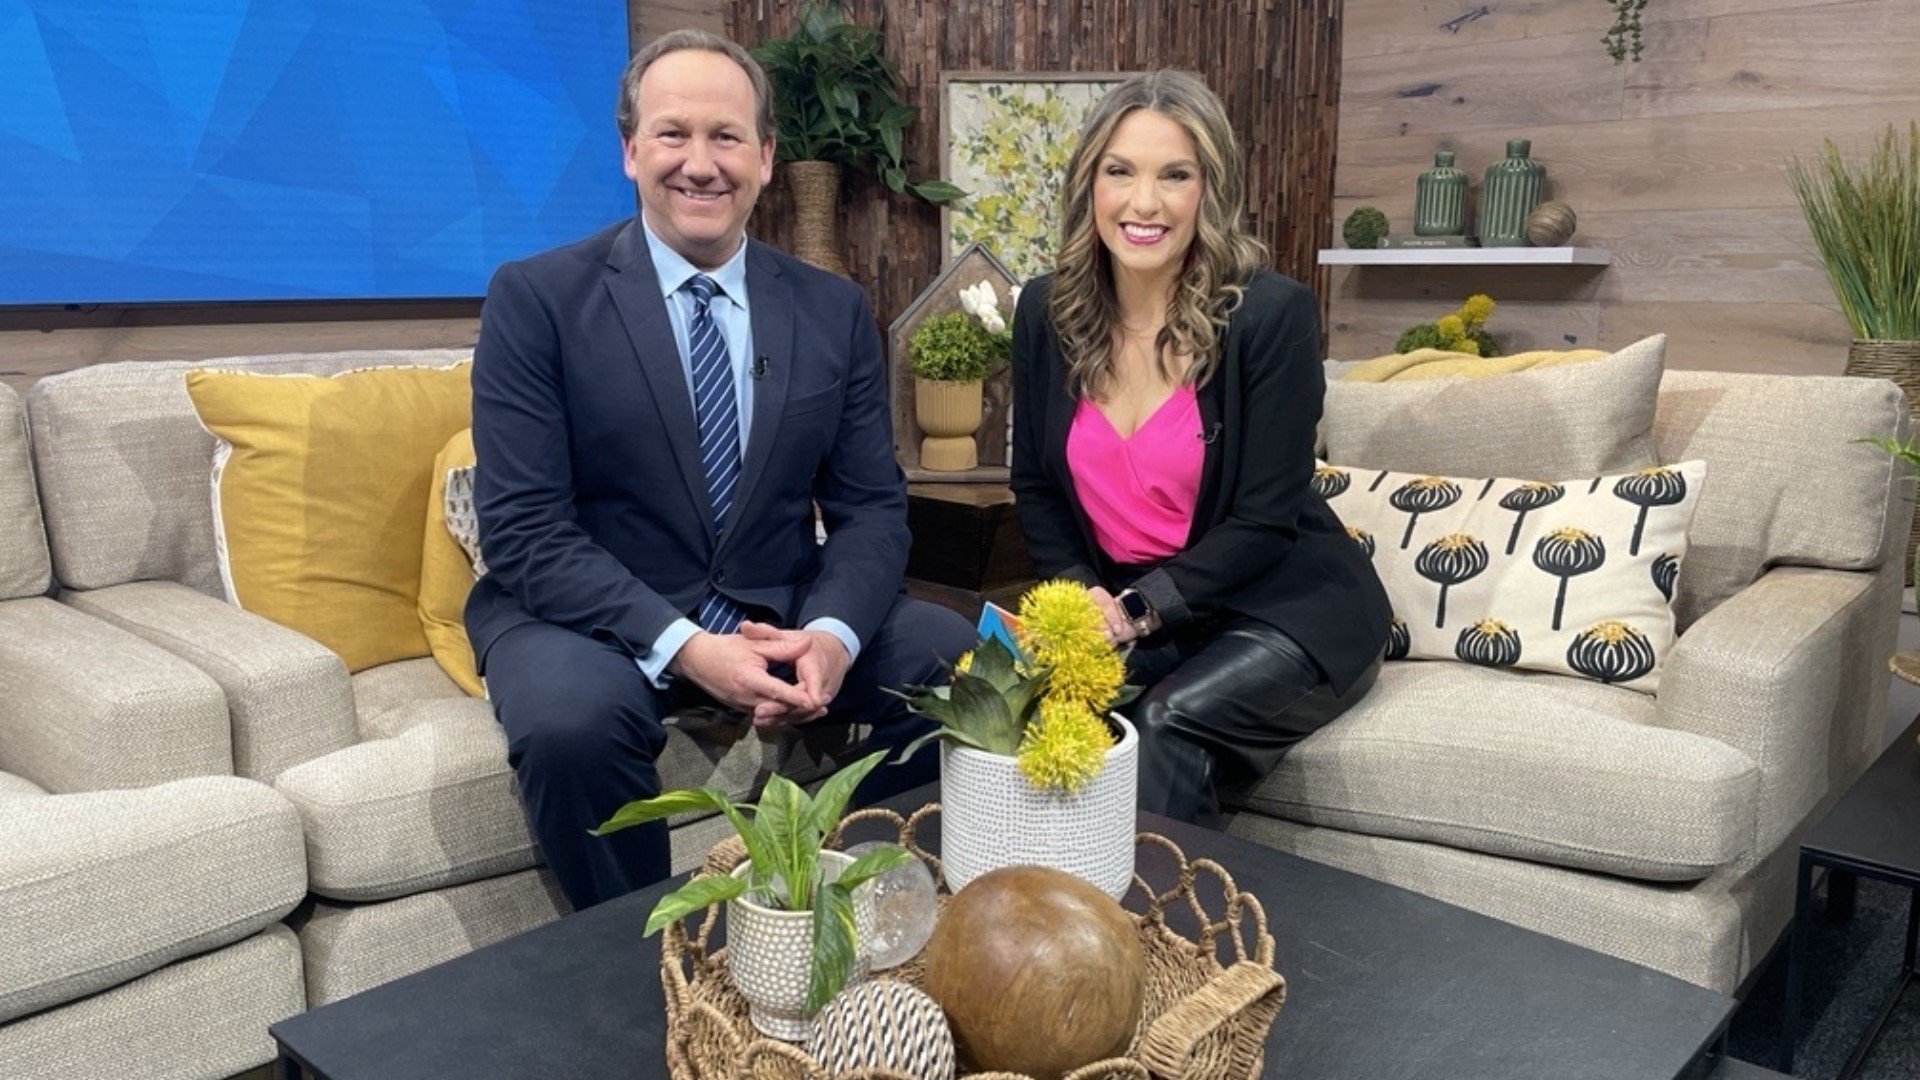 The Mariners kick off their 2023 season at home against the Guardians on March 30. KING 5 sports anchor Chris Egan talks to Amity about this year's squad. #newdaynw